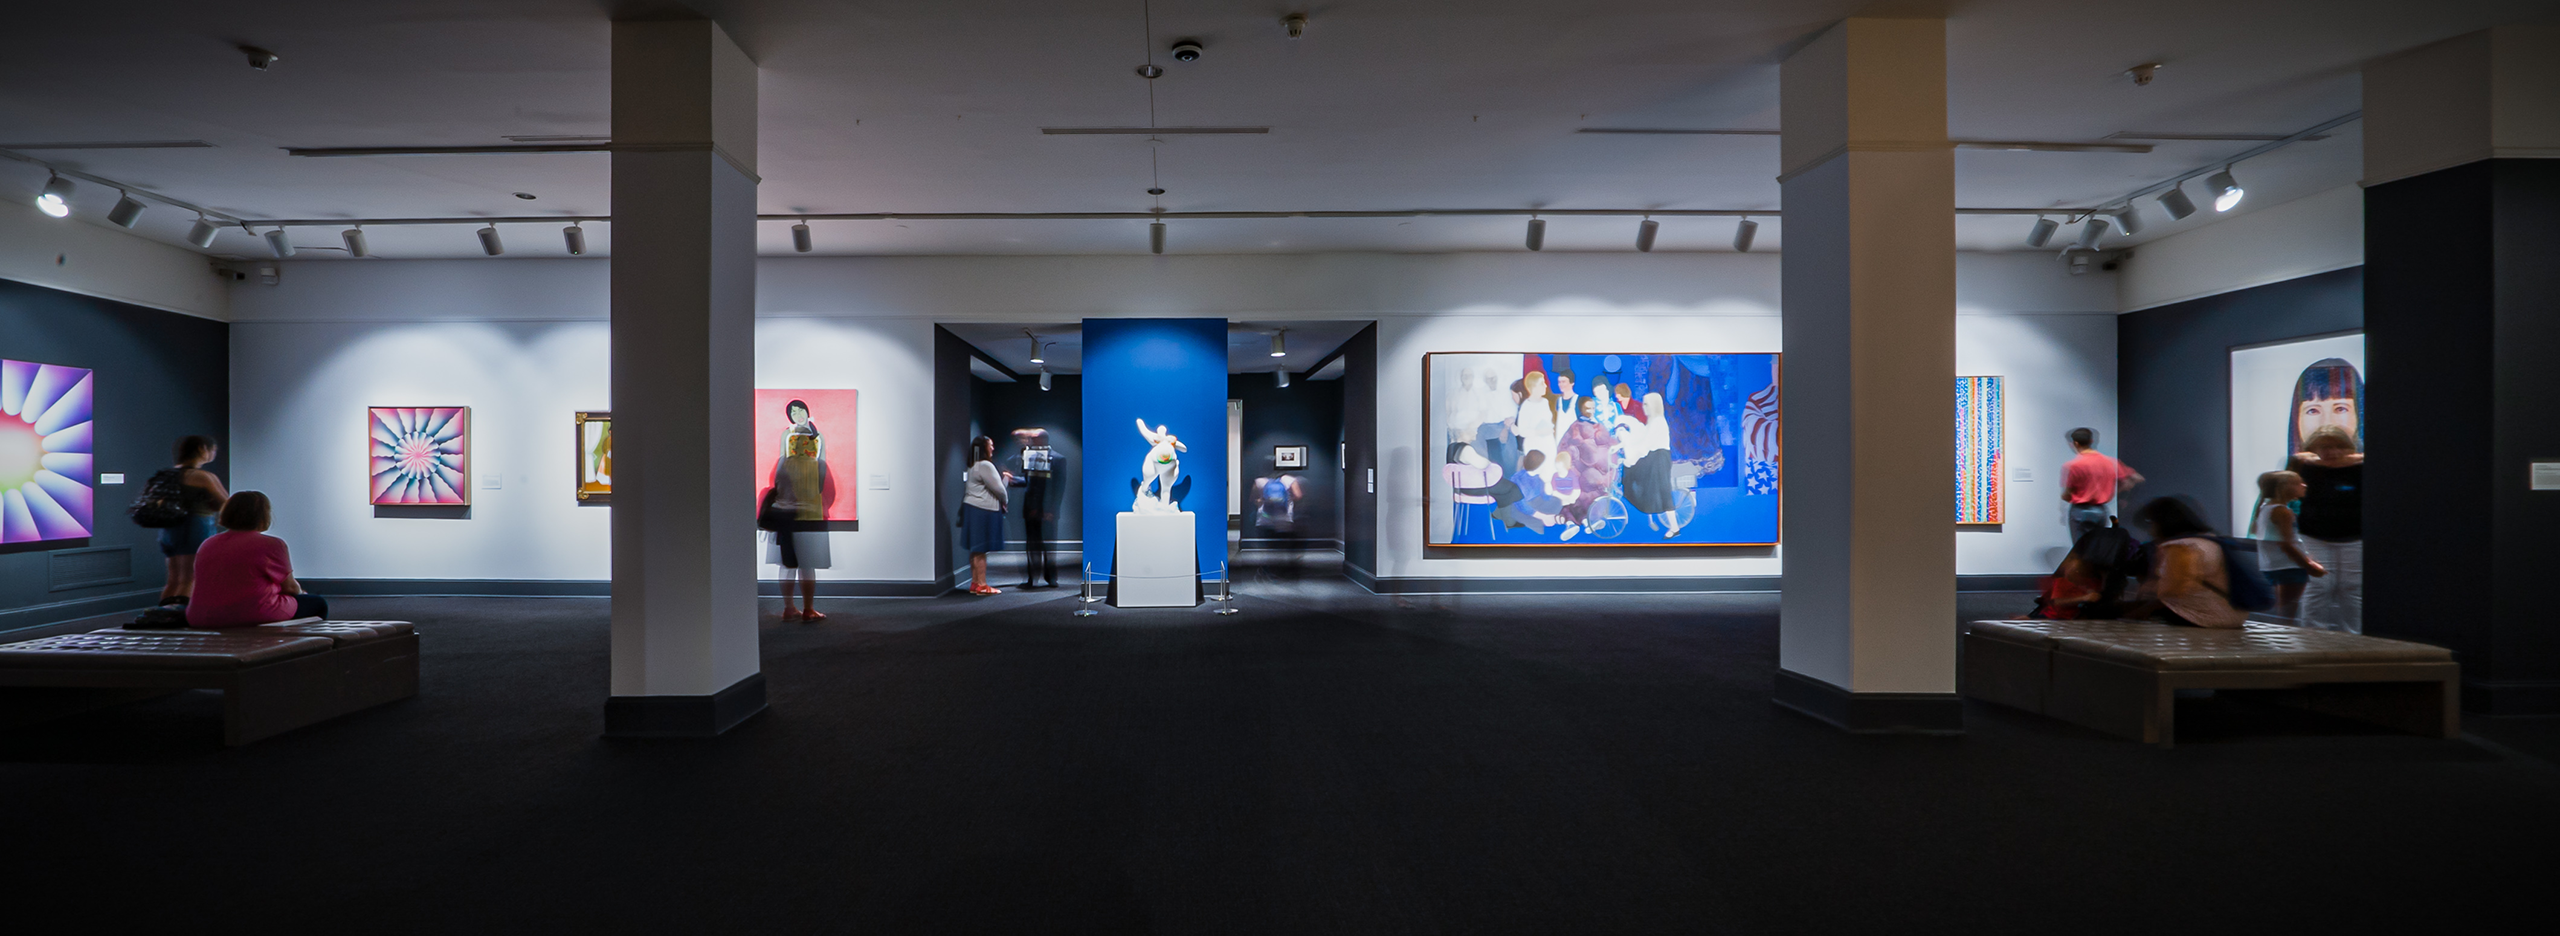 Wide angle view showing a full gallery. The floor is a dark gray carpet and there are two columns, through which large scale works in vibrant colors are visible.